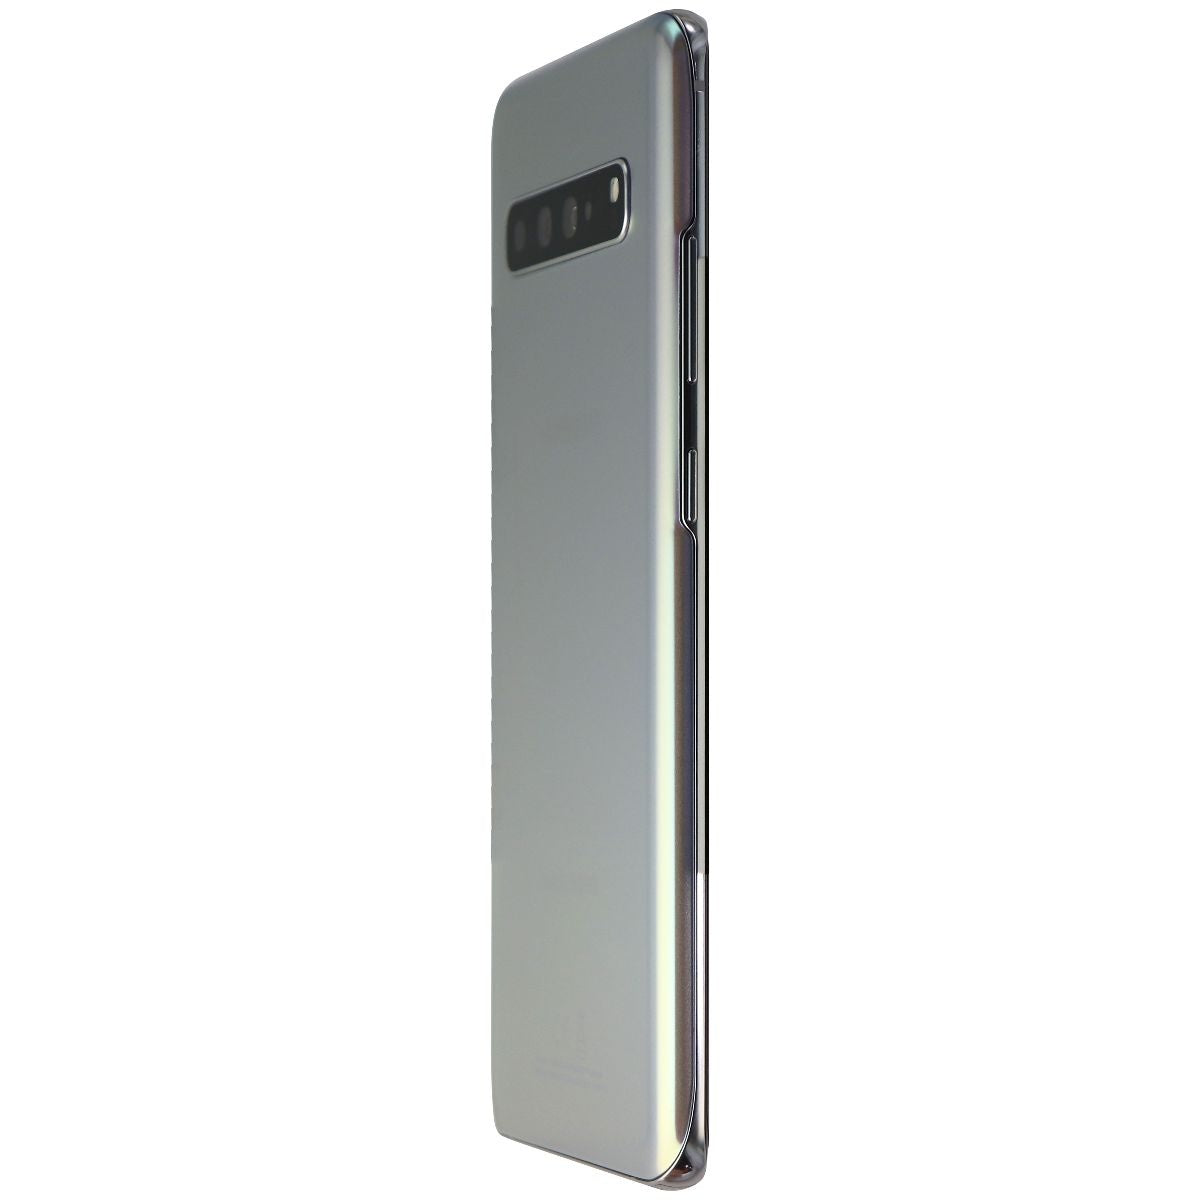 Samsung Galaxy S10 5G Smartphone (SM-G977U) Verizon Only - 512GB/Crown Silver Cell Phones & Smartphones Samsung    - Simple Cell Bulk Wholesale Pricing - USA Seller